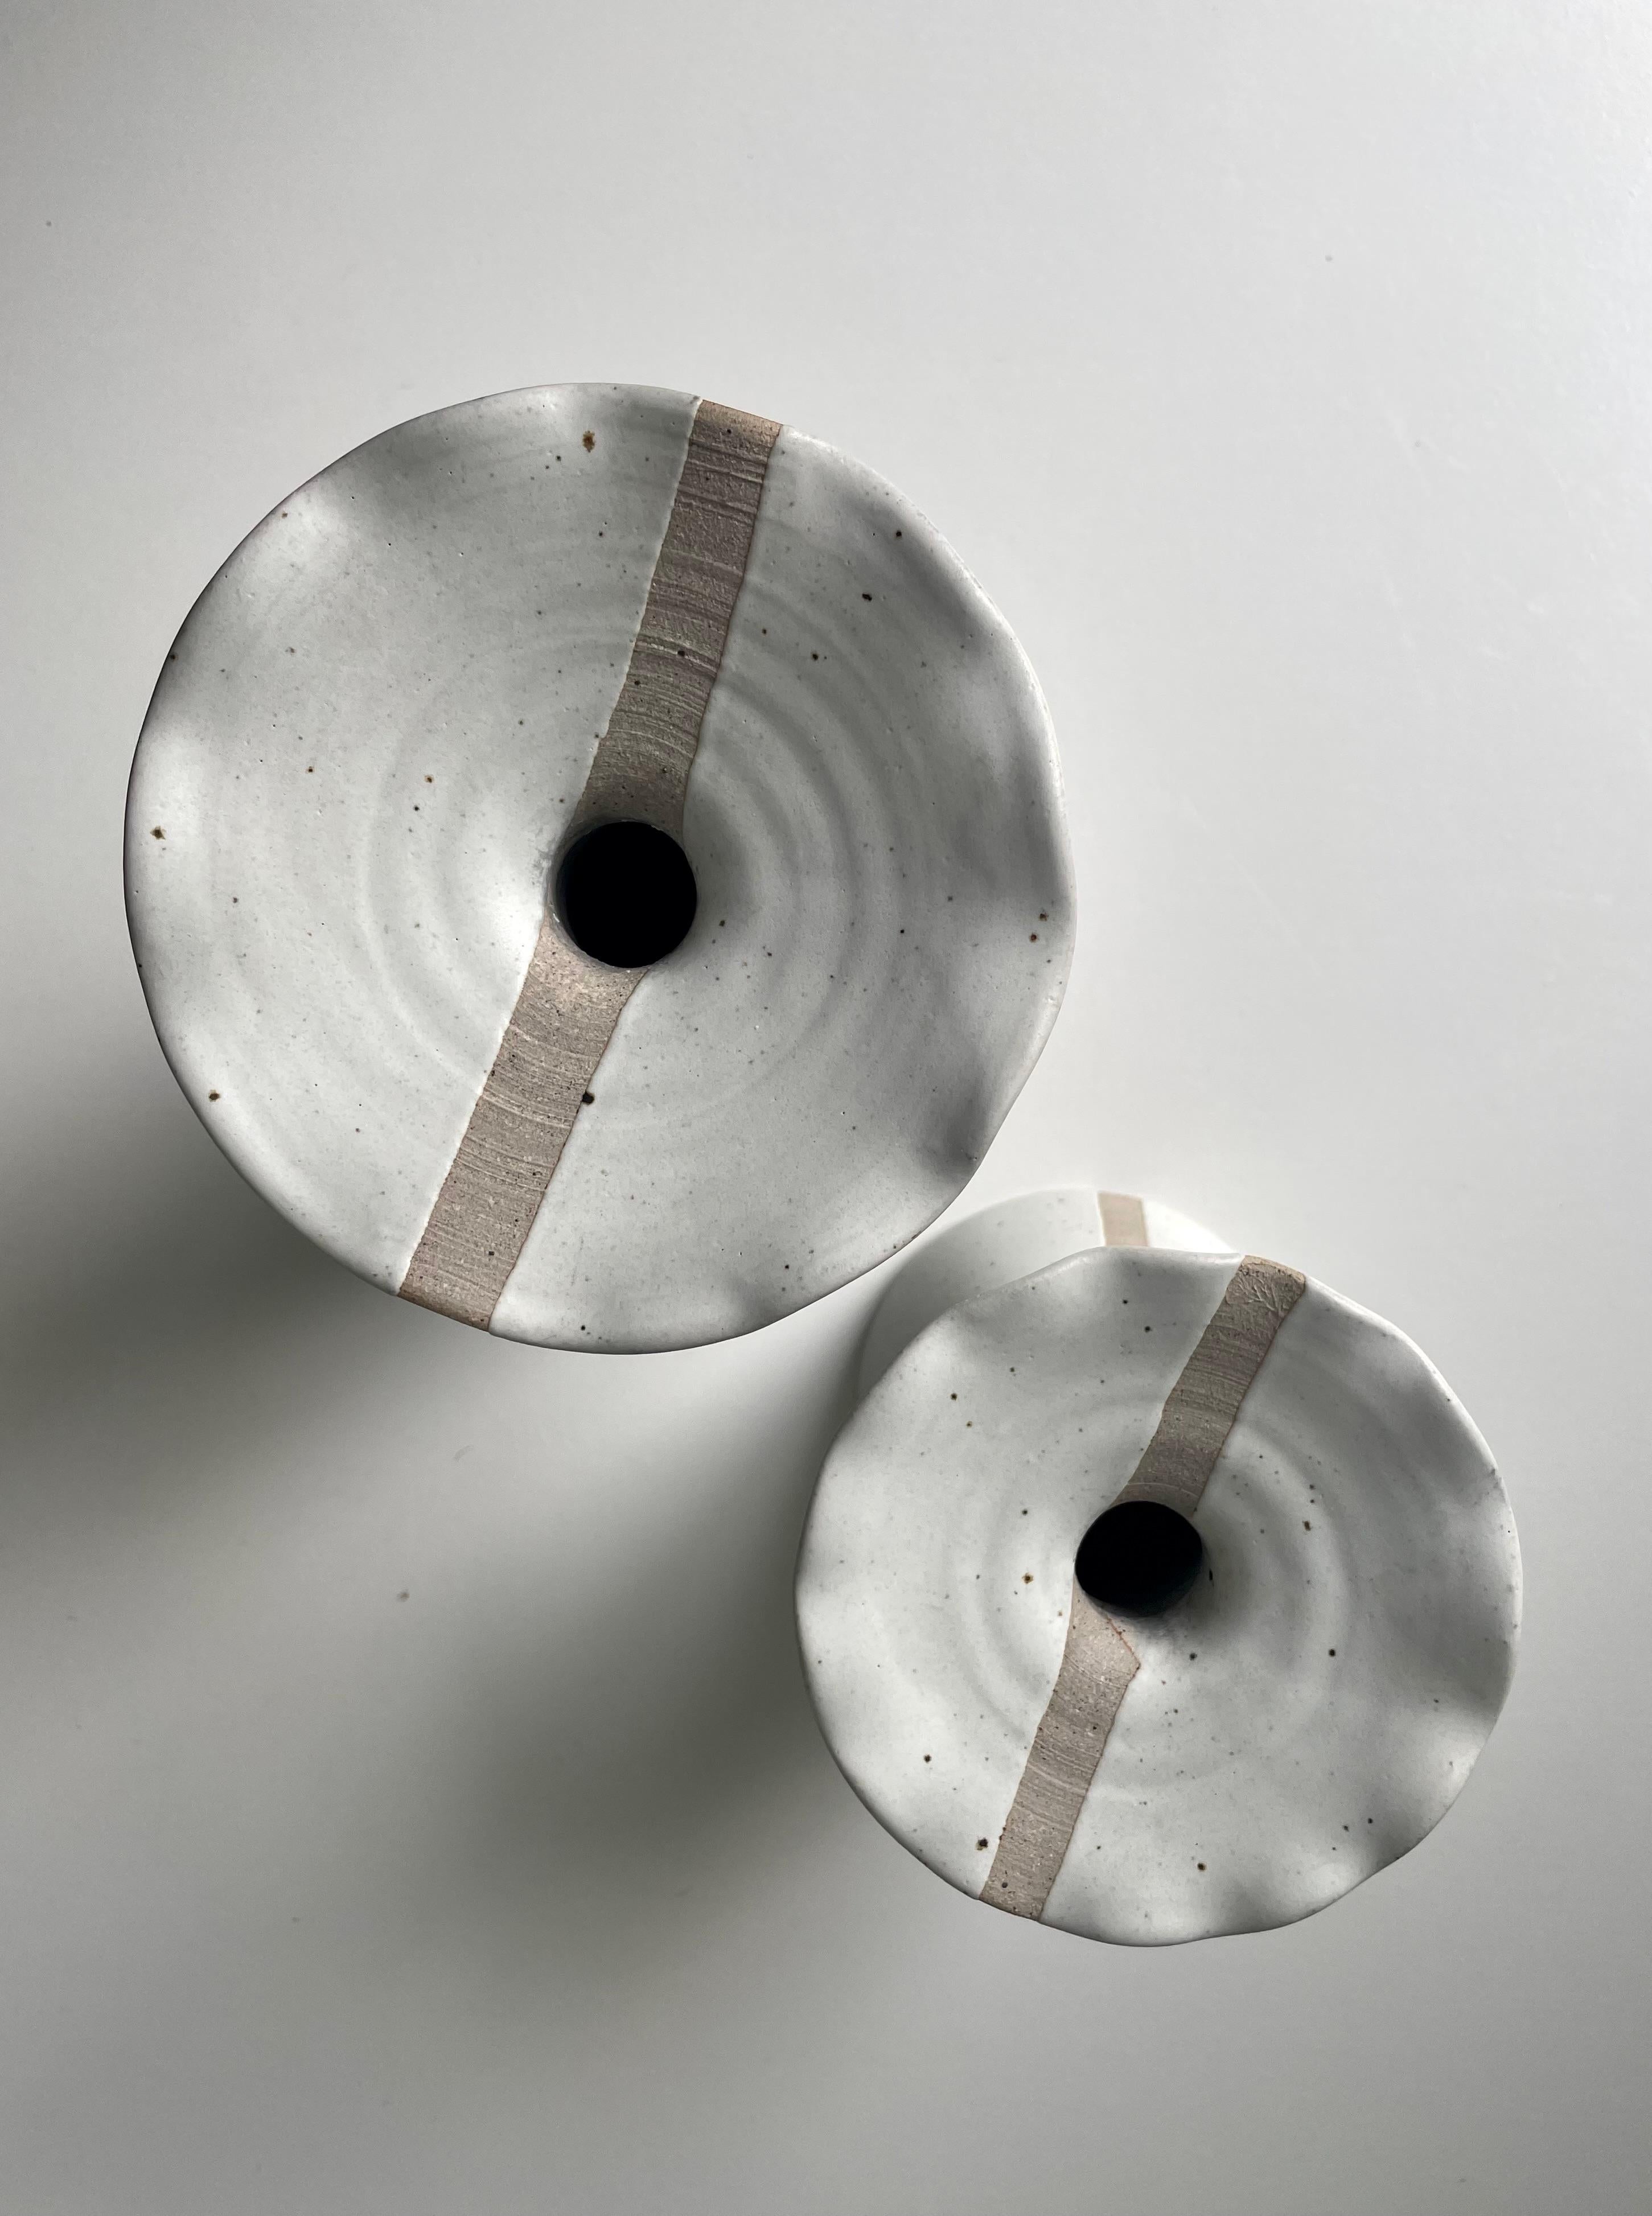 20th Century Modern Earth-Toned Vases, Candle Holders with Graphic Line, Denmark, 1980s For Sale